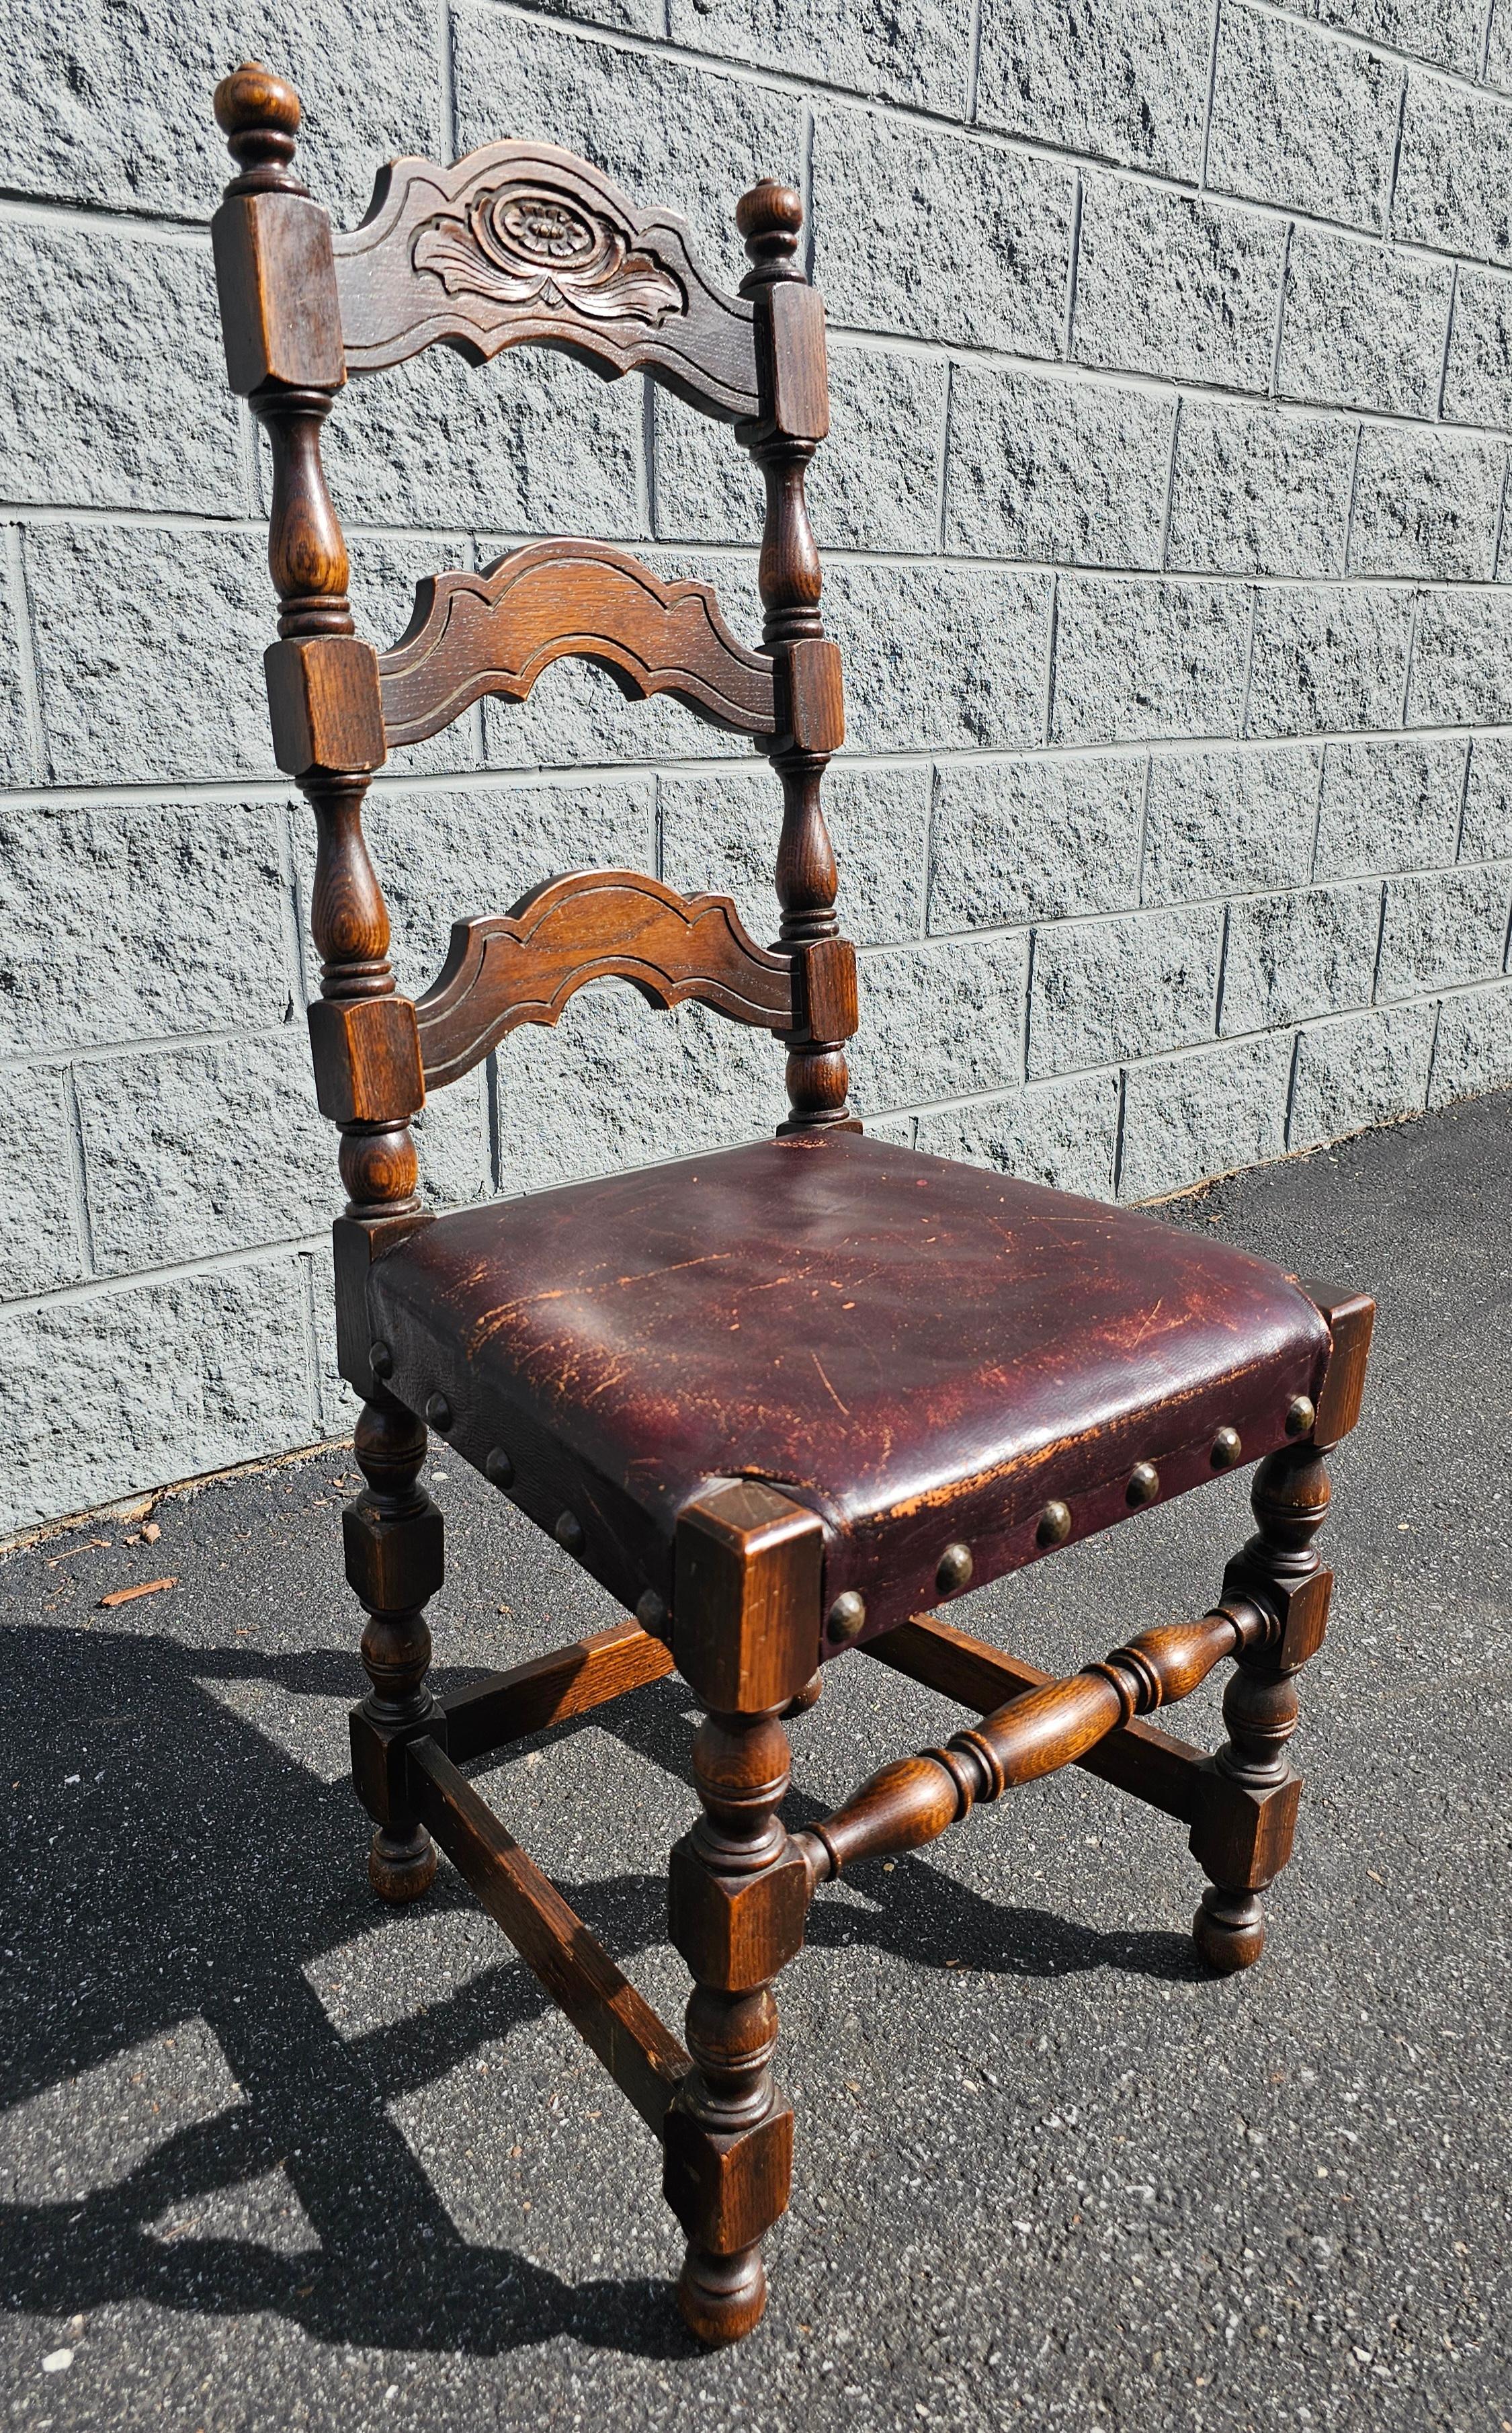 A Jacobean Revival Style Leather Upholstered Oak Side Chair, late 19th to early 20th Century. Measures 18